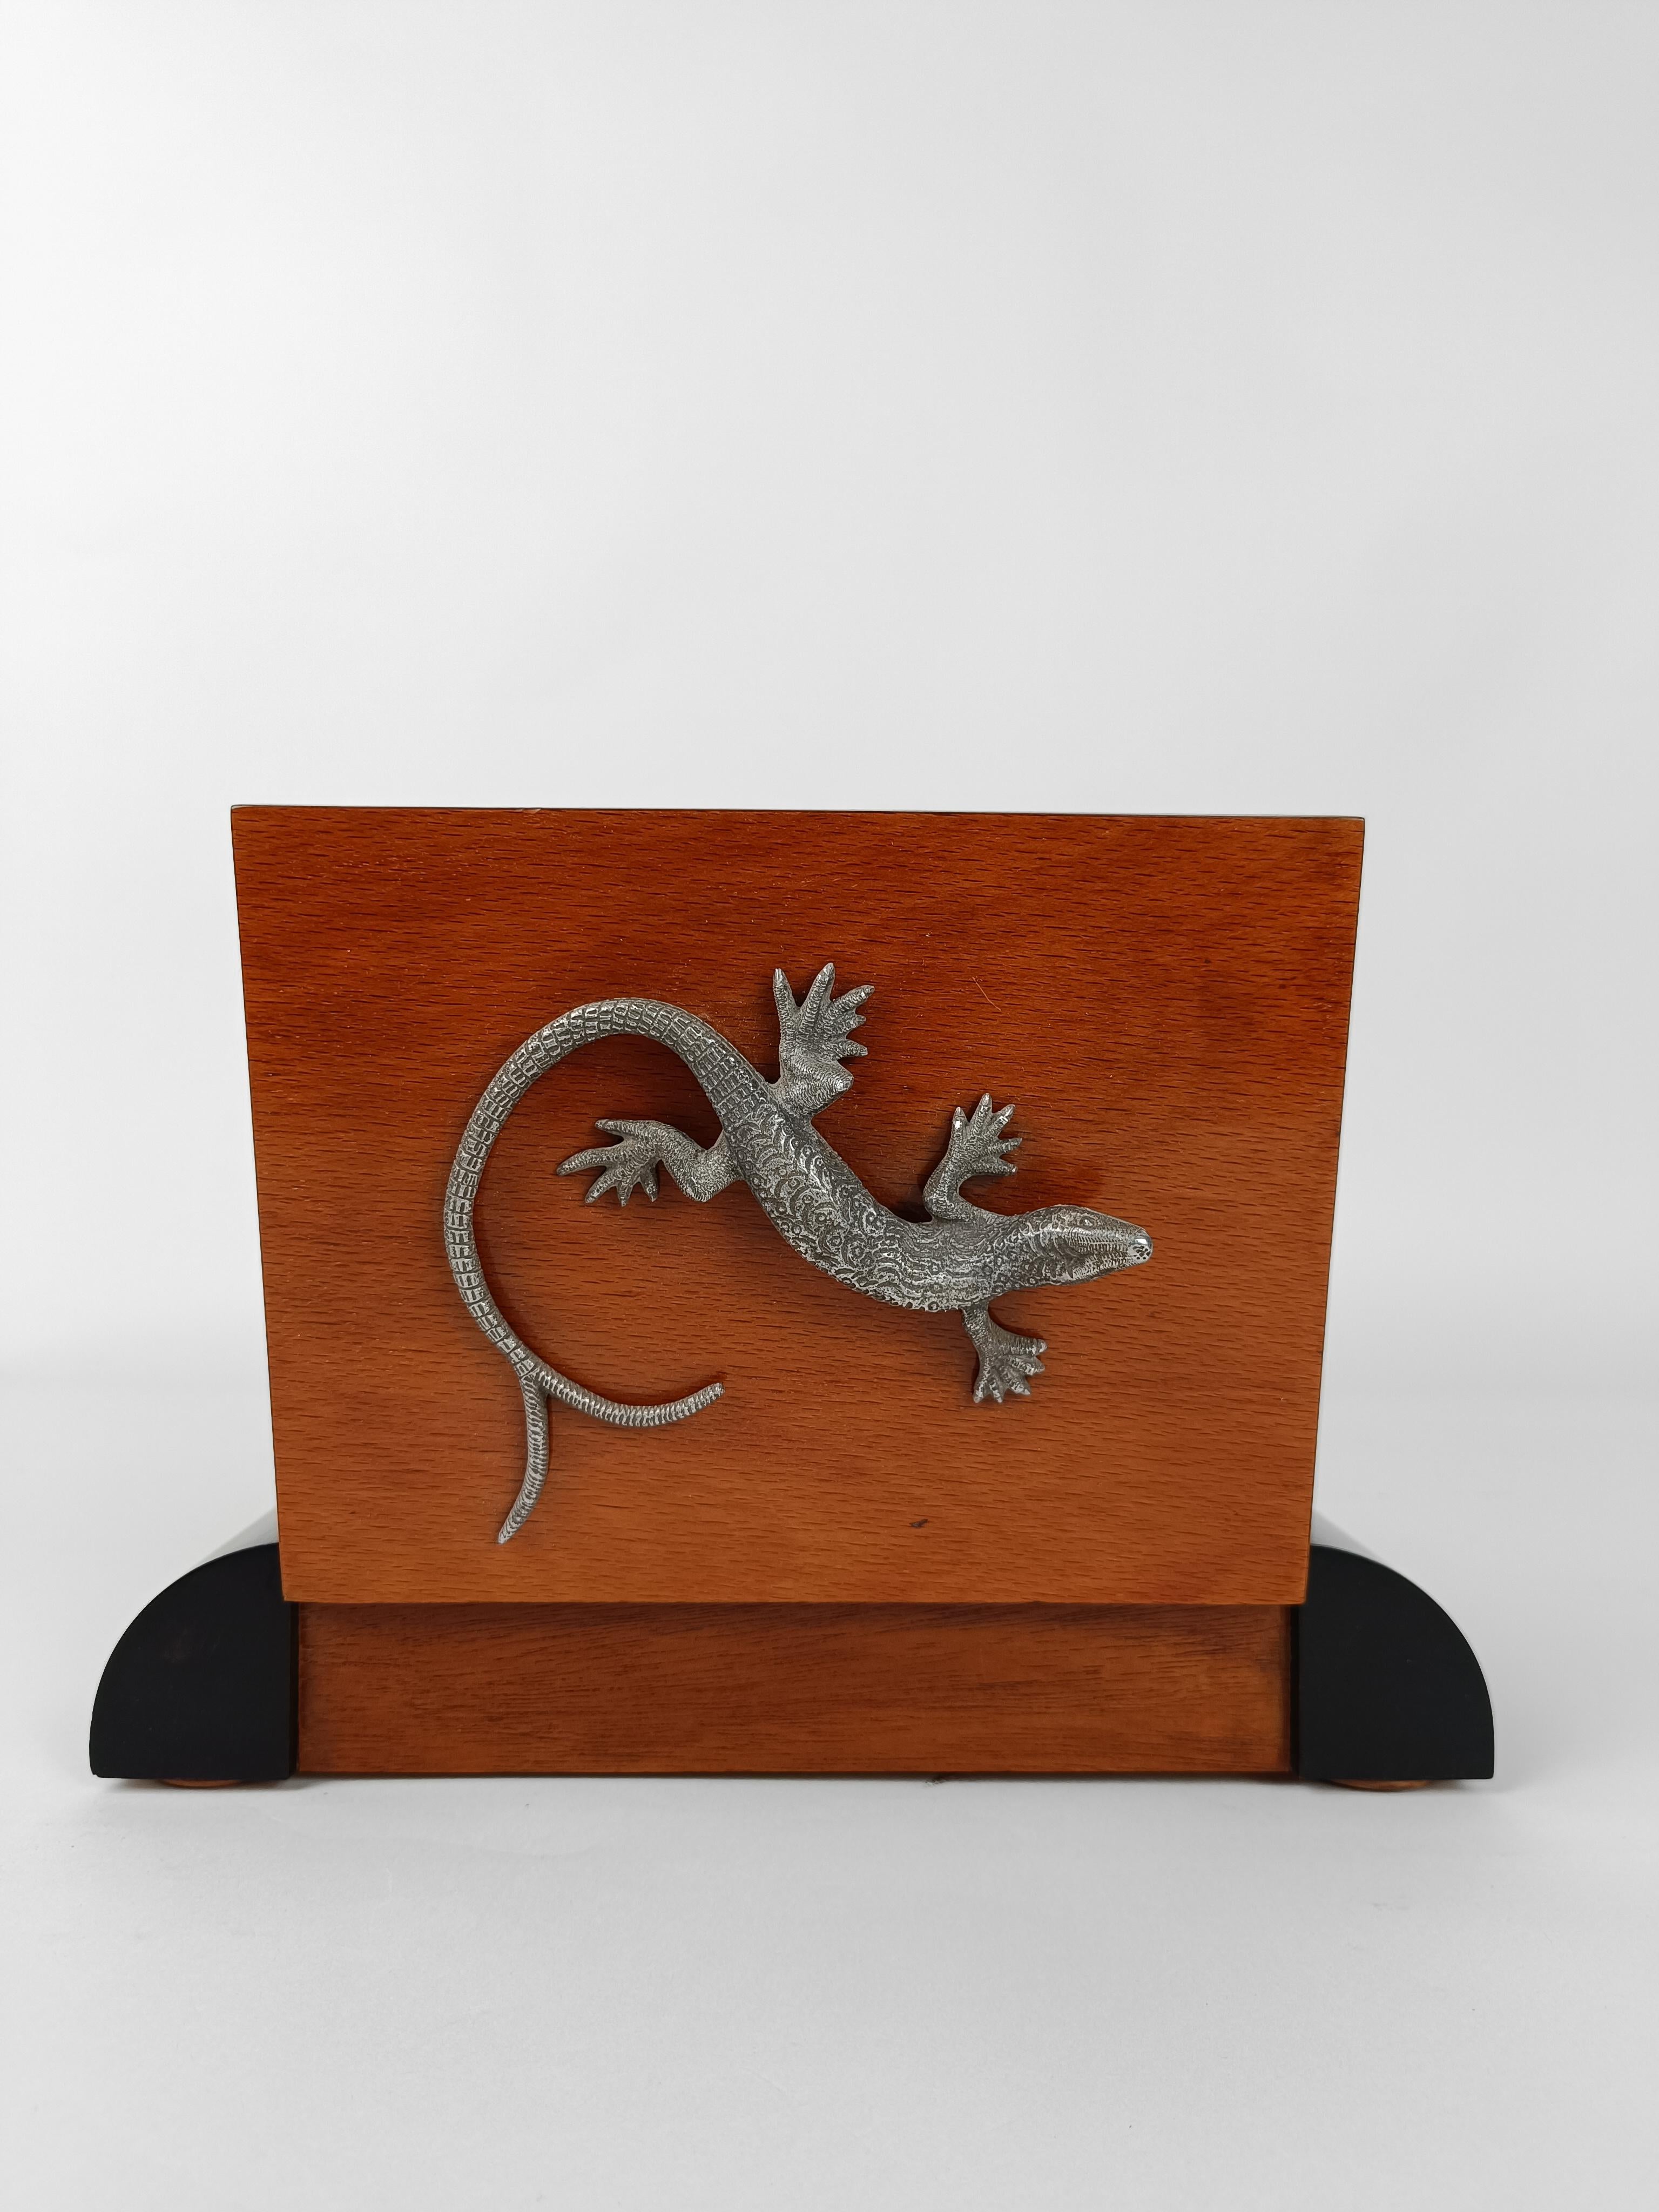 Art Deco wooden Box decorated with a Silver Tone Metal Lizard-shaped Handle For Sale 4